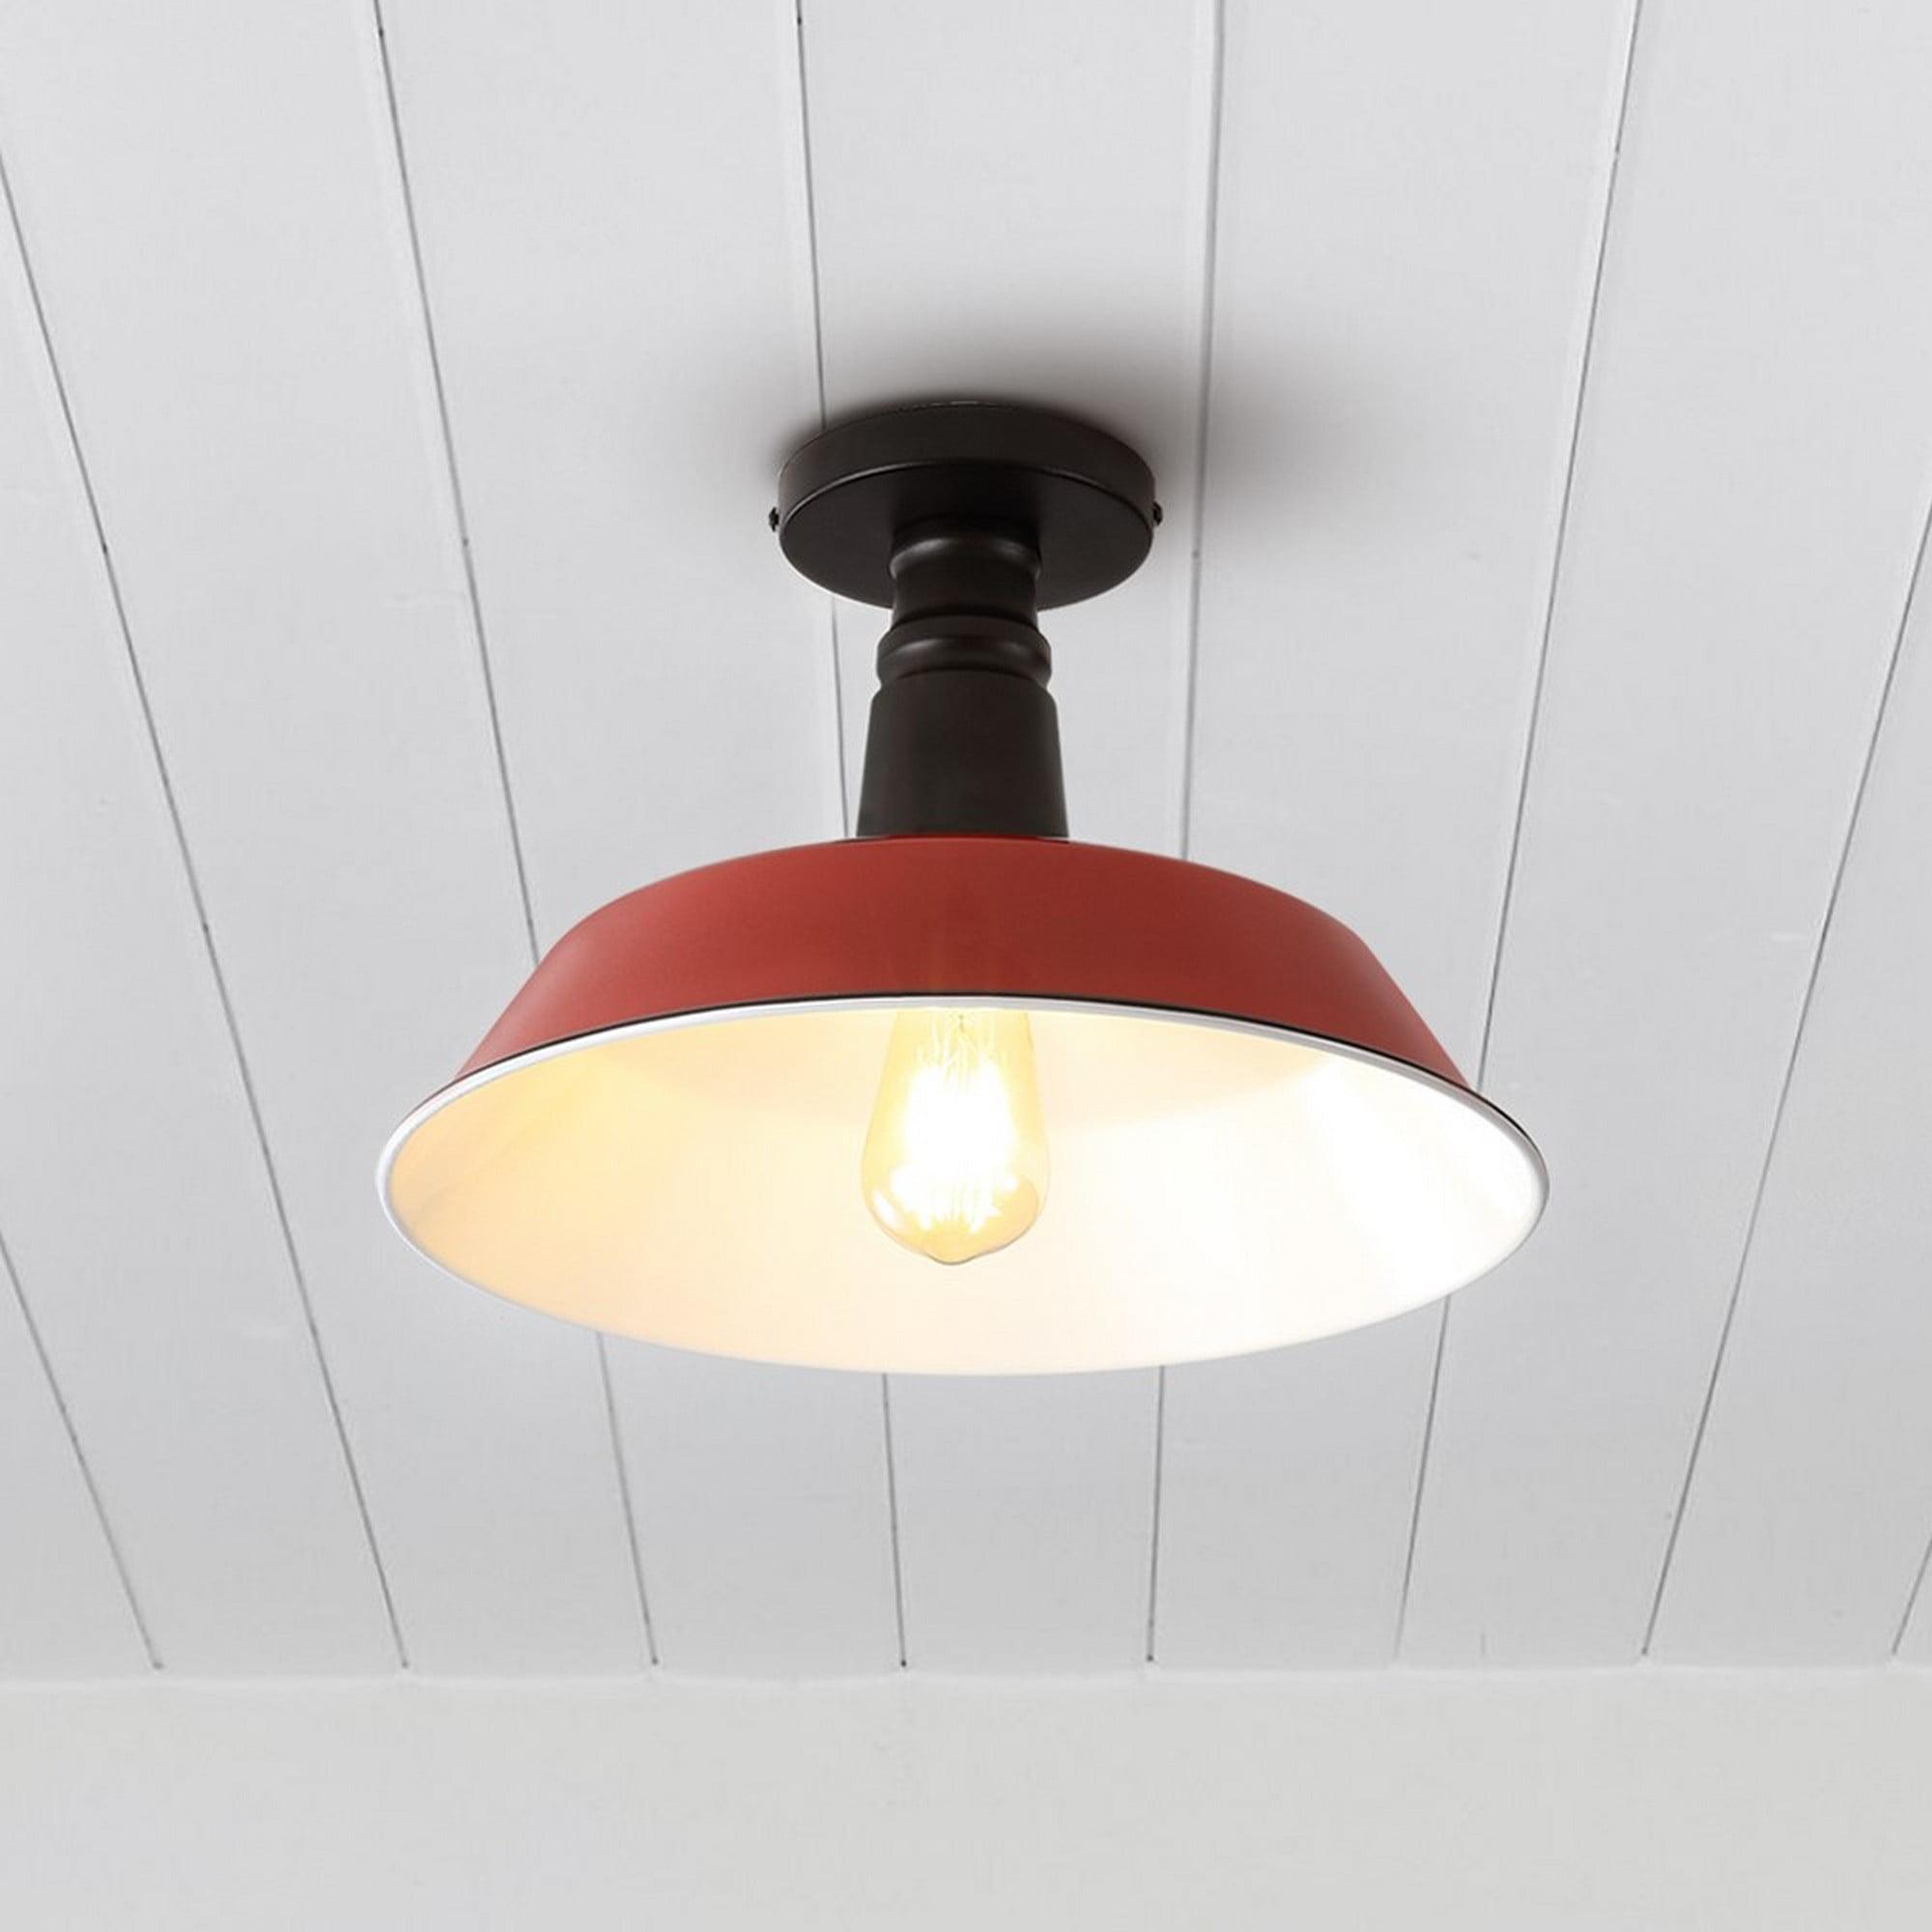 Farmhouse Inspired 14" Red and Black LED Ceiling Light